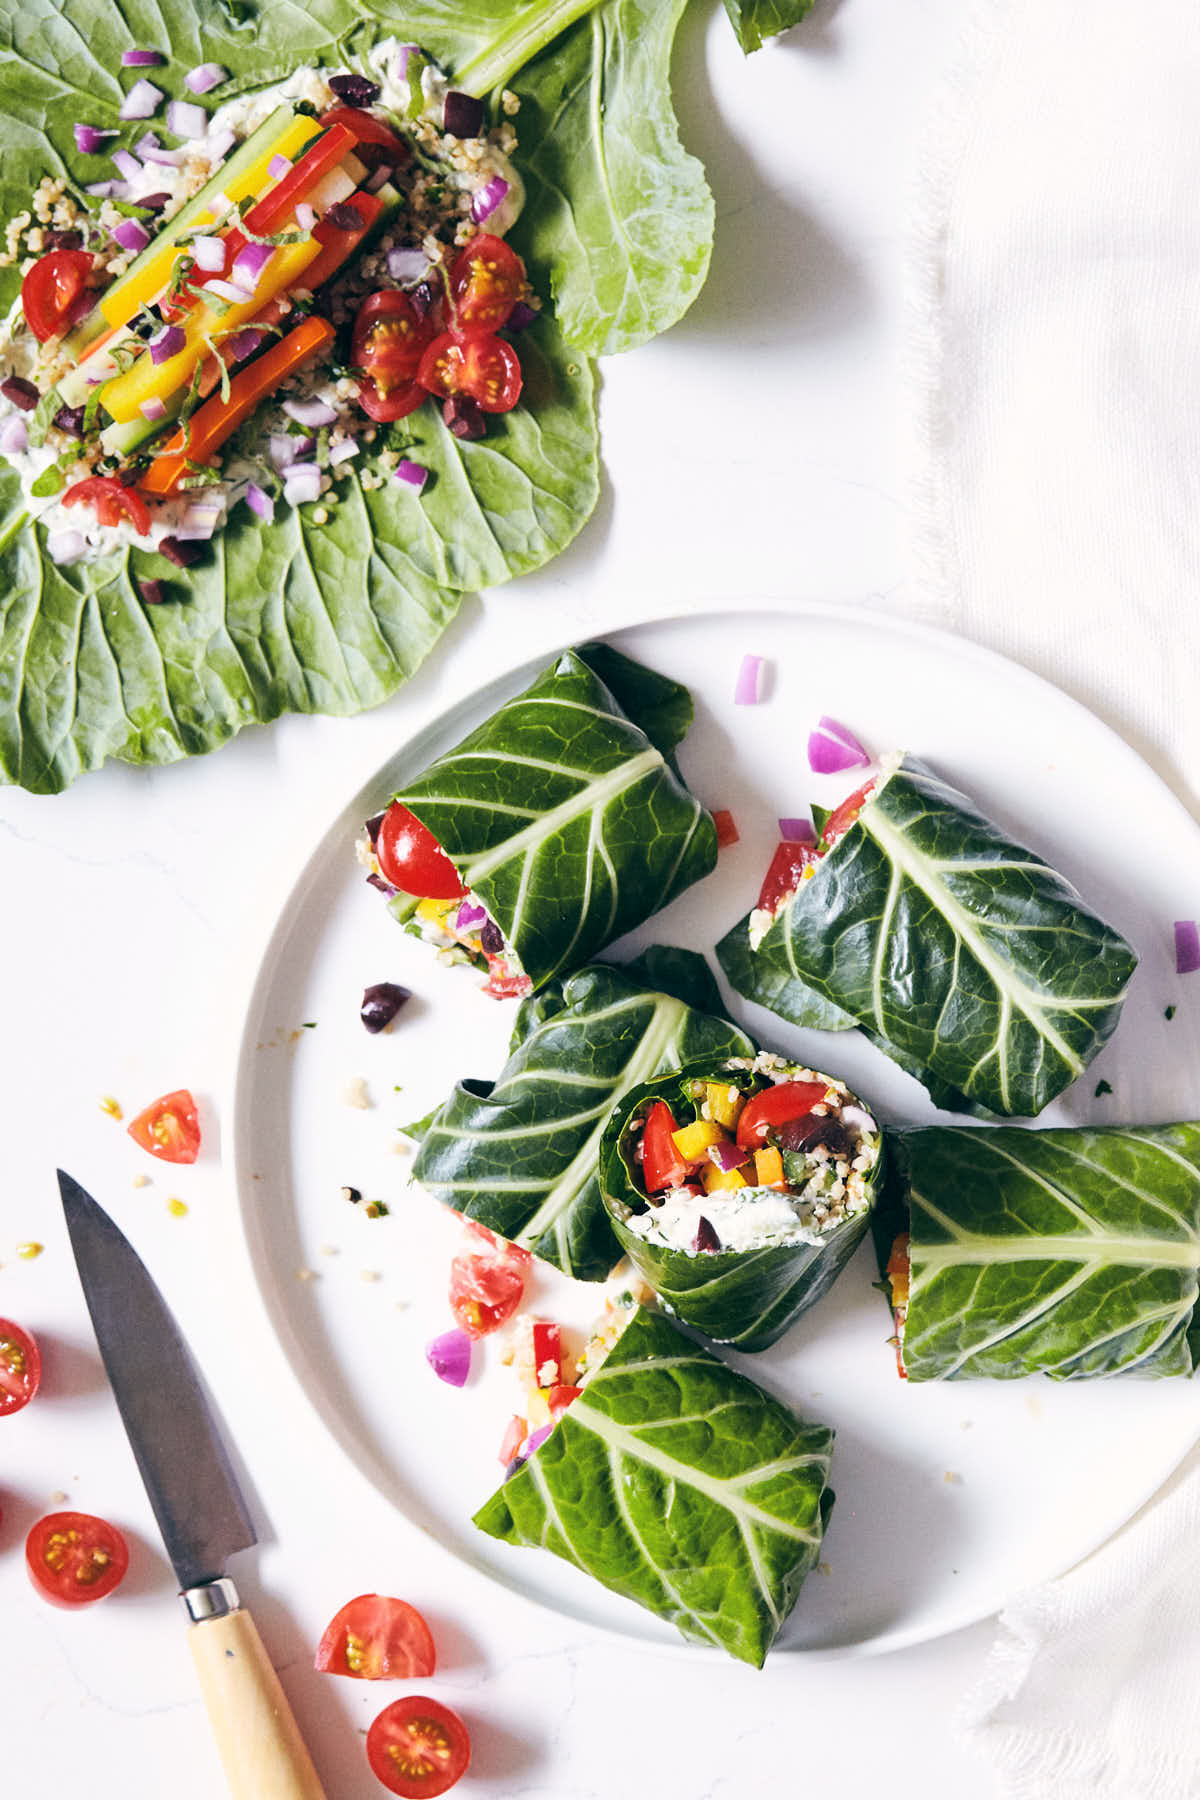 Plate of collard wraps cut in half with veggies inside visible